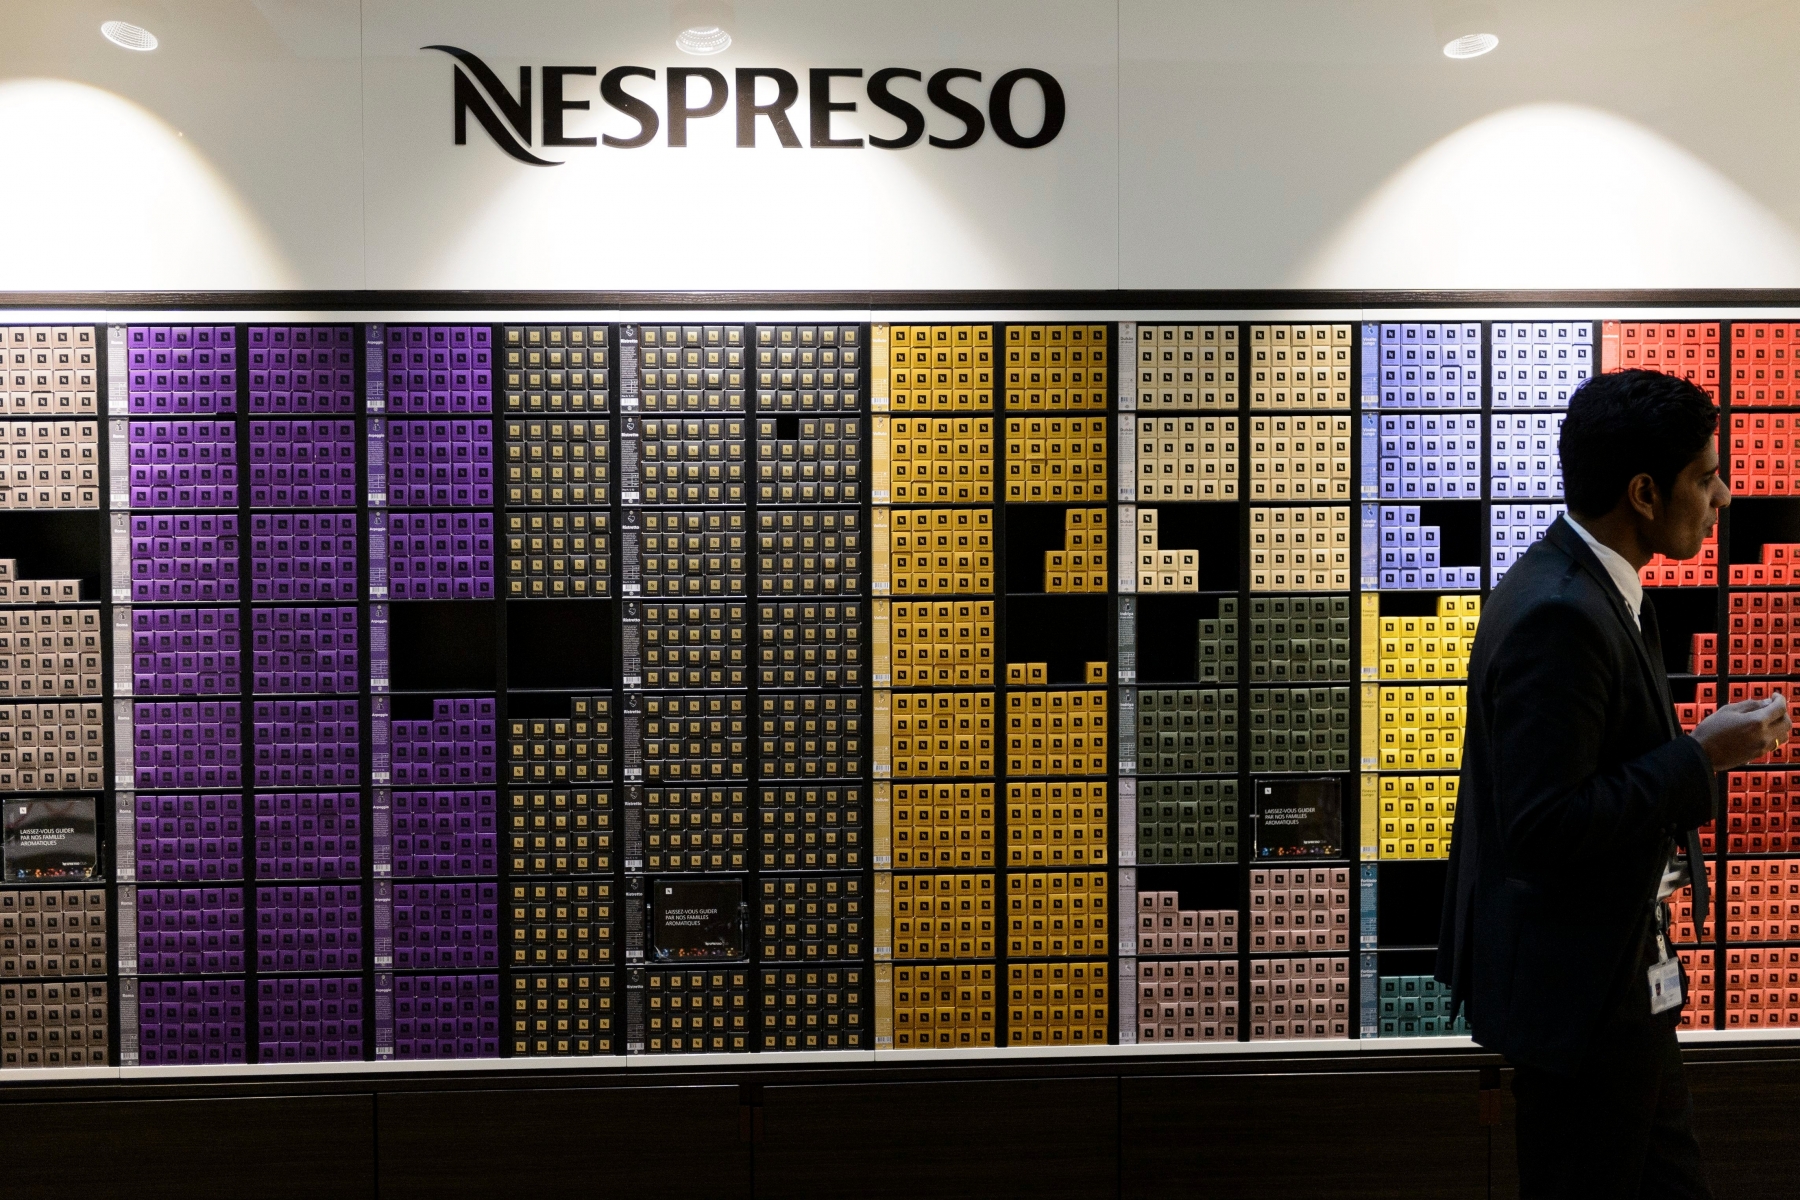 People purchases Nespresso coffee at the Nestle's own supermarket after the 2012 full-year results press conference of the food and drinks giant Nestle in Vevey, Switzerland, Thursday, February 14, 2013. Nestle SA, the world's biggest food and drinks maker, overcame tough global economic conditions to post a full-year net profit Thursday of 10.6 billion Swiss francs ($11.55 billion) for 2012, but predicted another challenging year ahead. (KEYSTONE/Laurent Gillieron) SWITZERLAND NESTLE